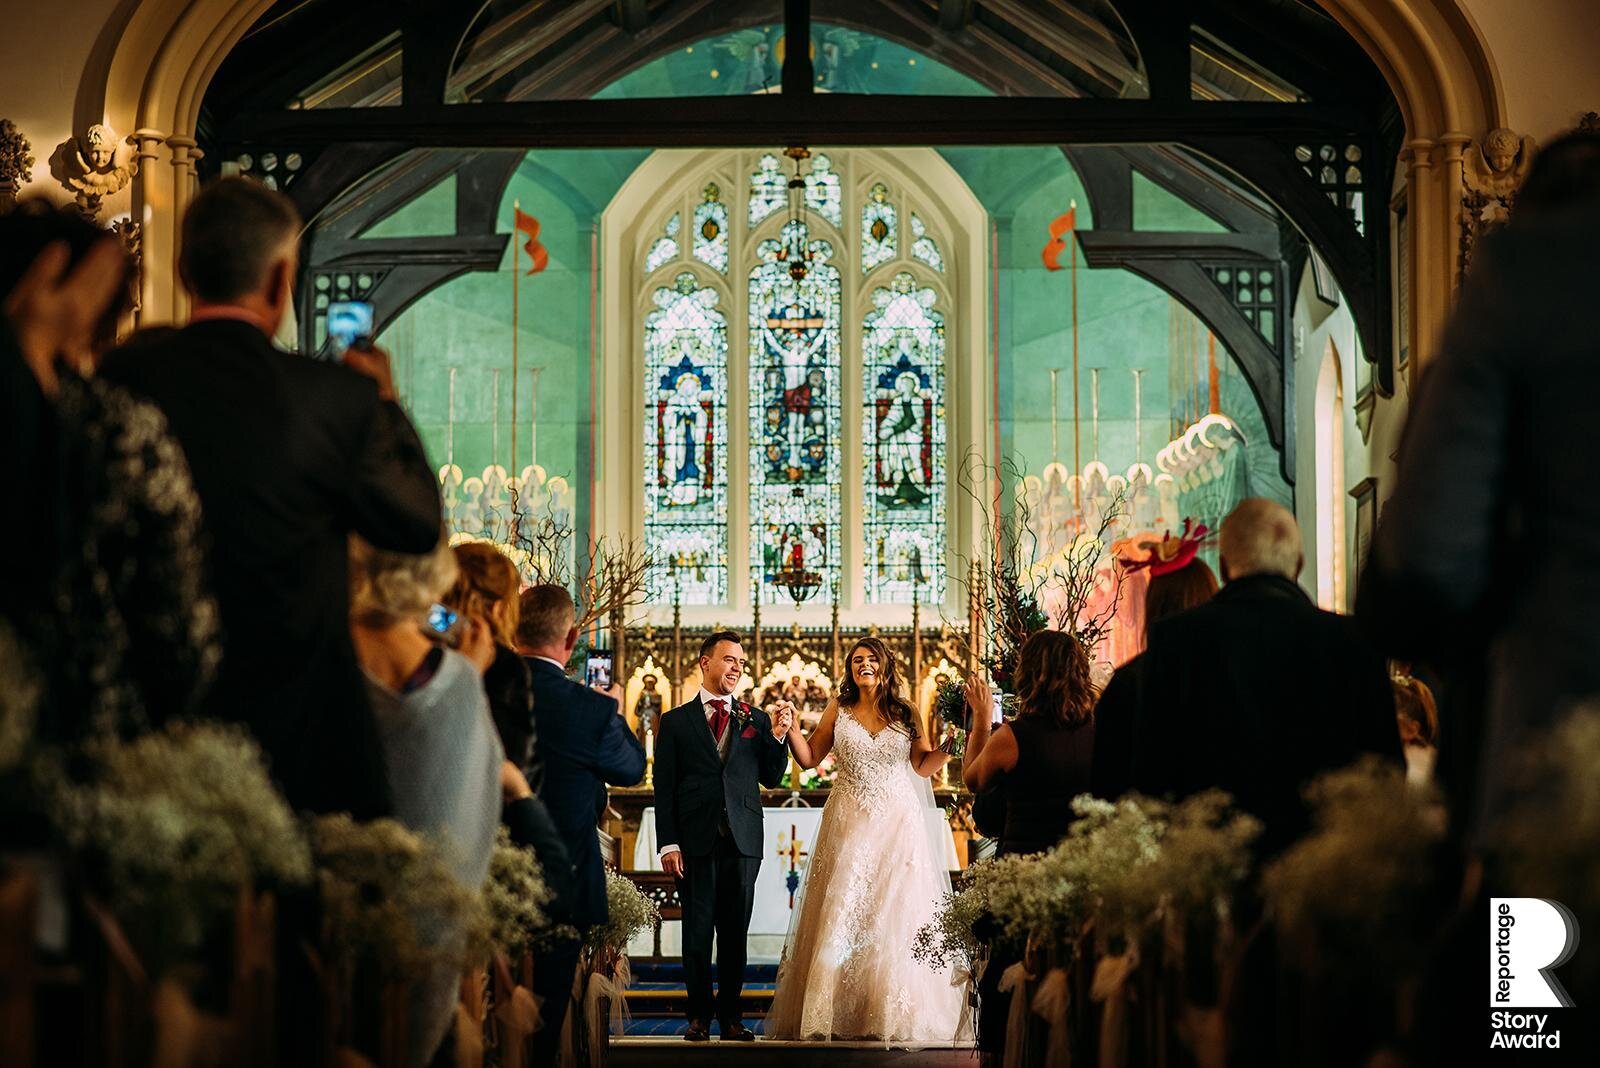  Bride and groom celebrate getting married in church 